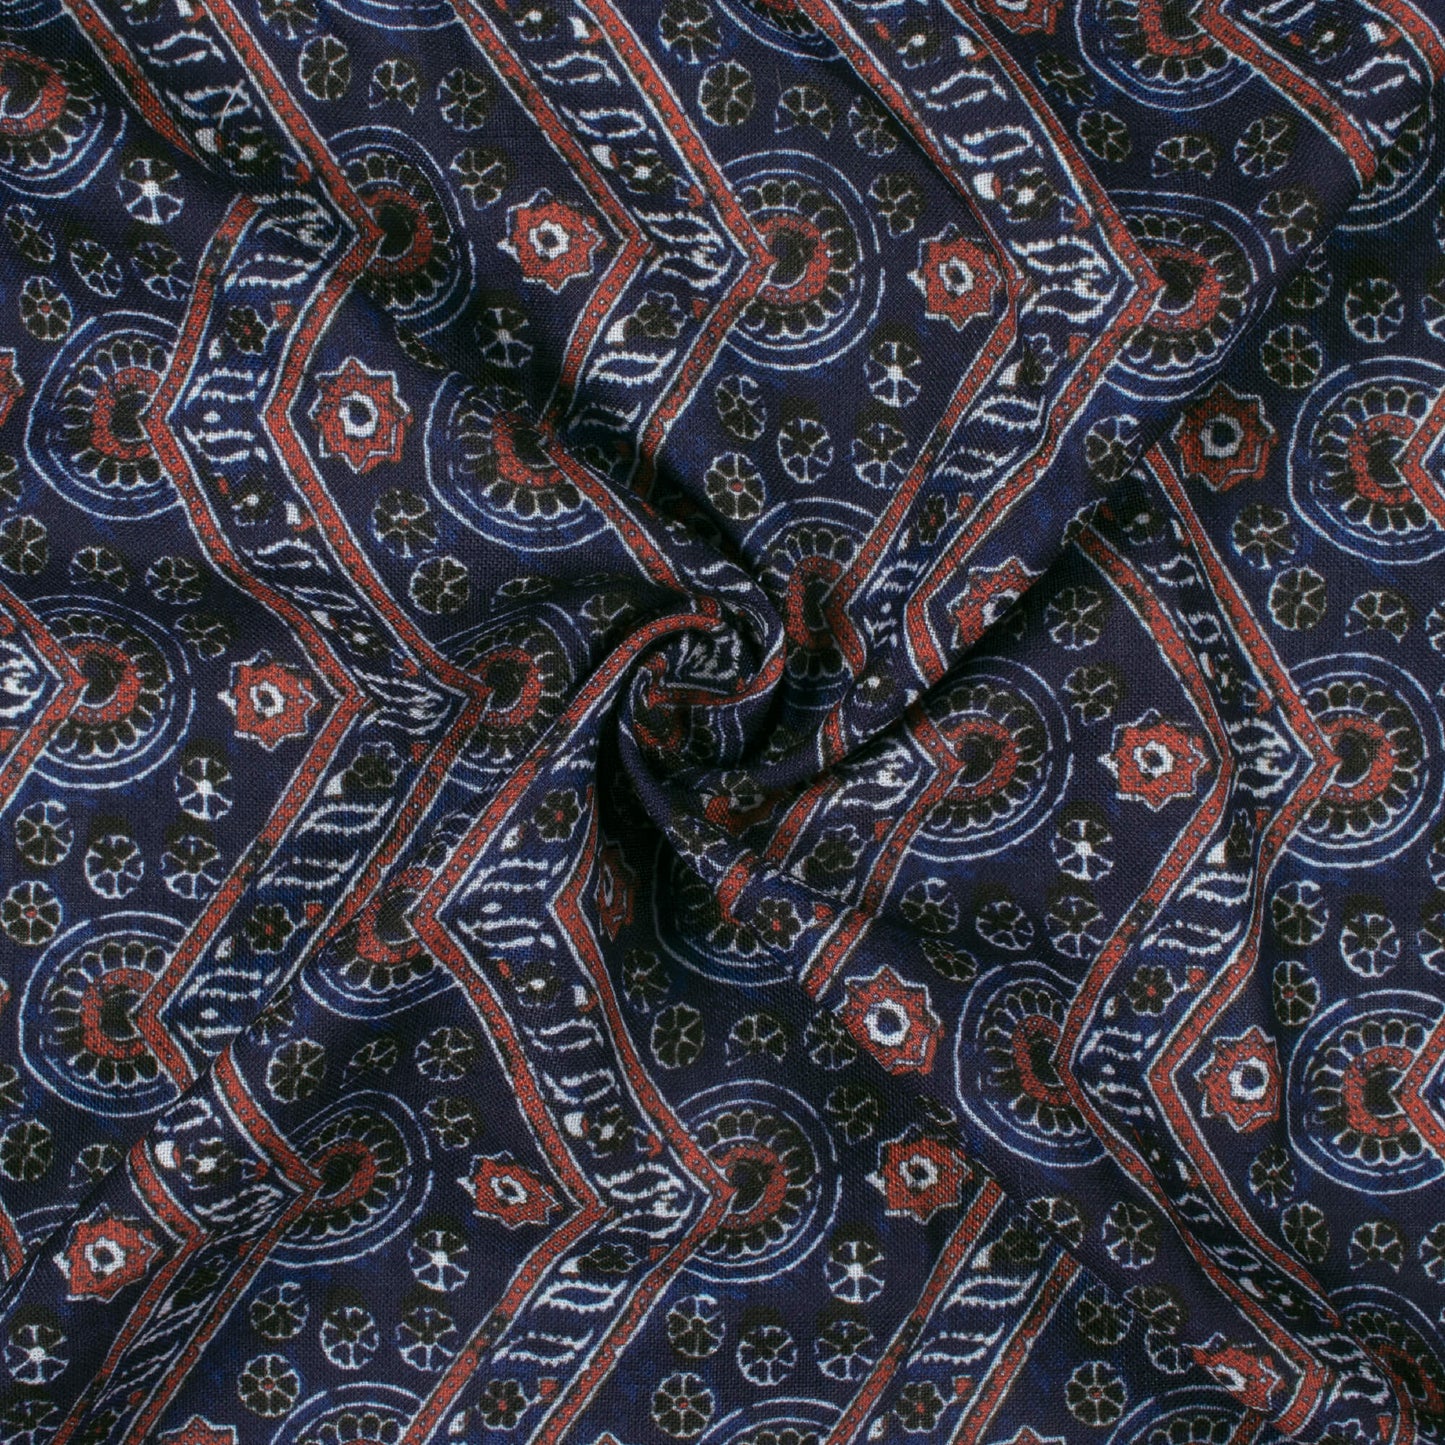 Space Blue And Maroon Ajrakh Pattern Digital Print Linen Textured Fabric (Width 56 Inches)